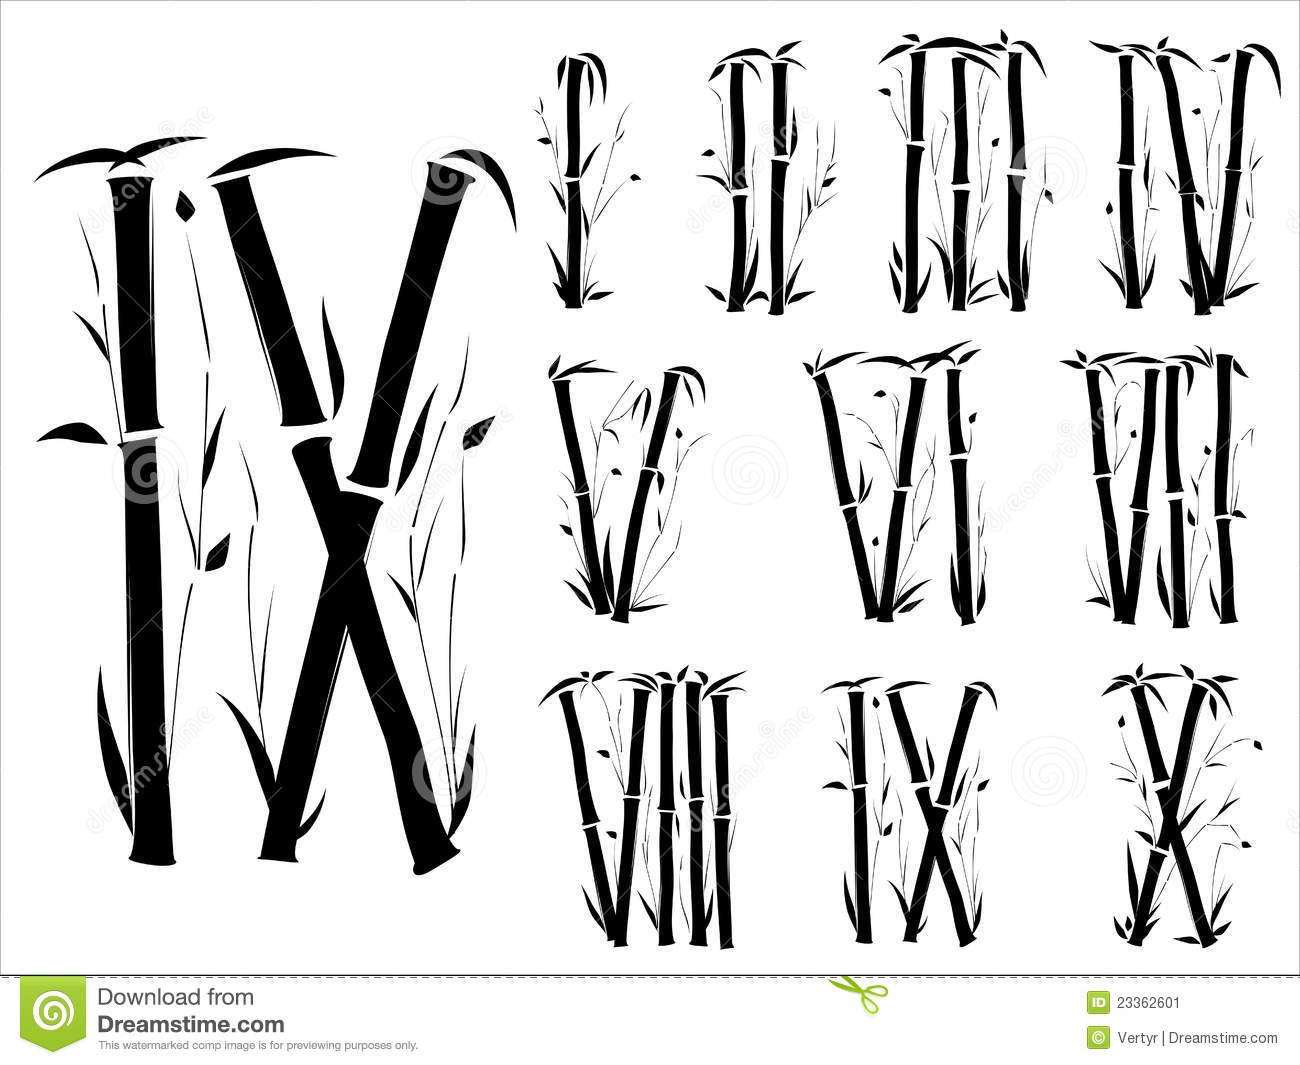 free fonts roman numerals numbers